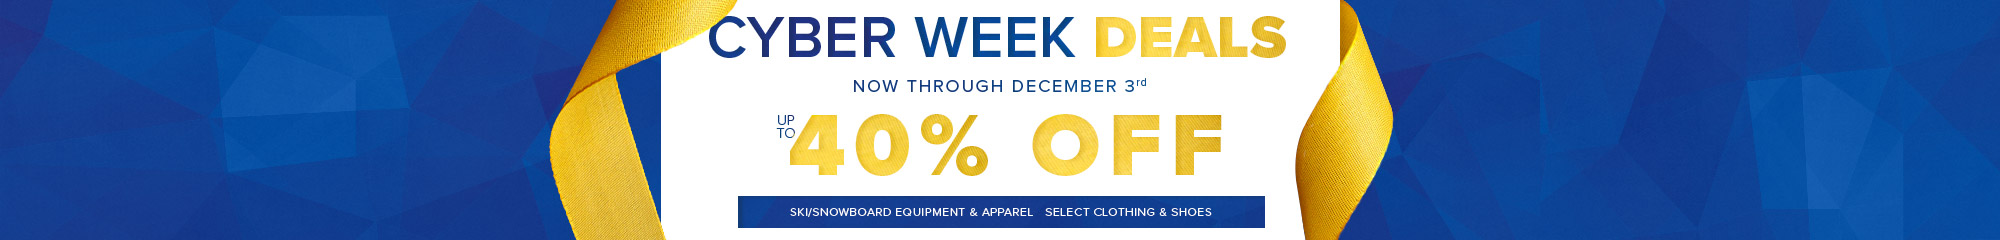 Cyber Week - Now through December 3rd up to 40% off 